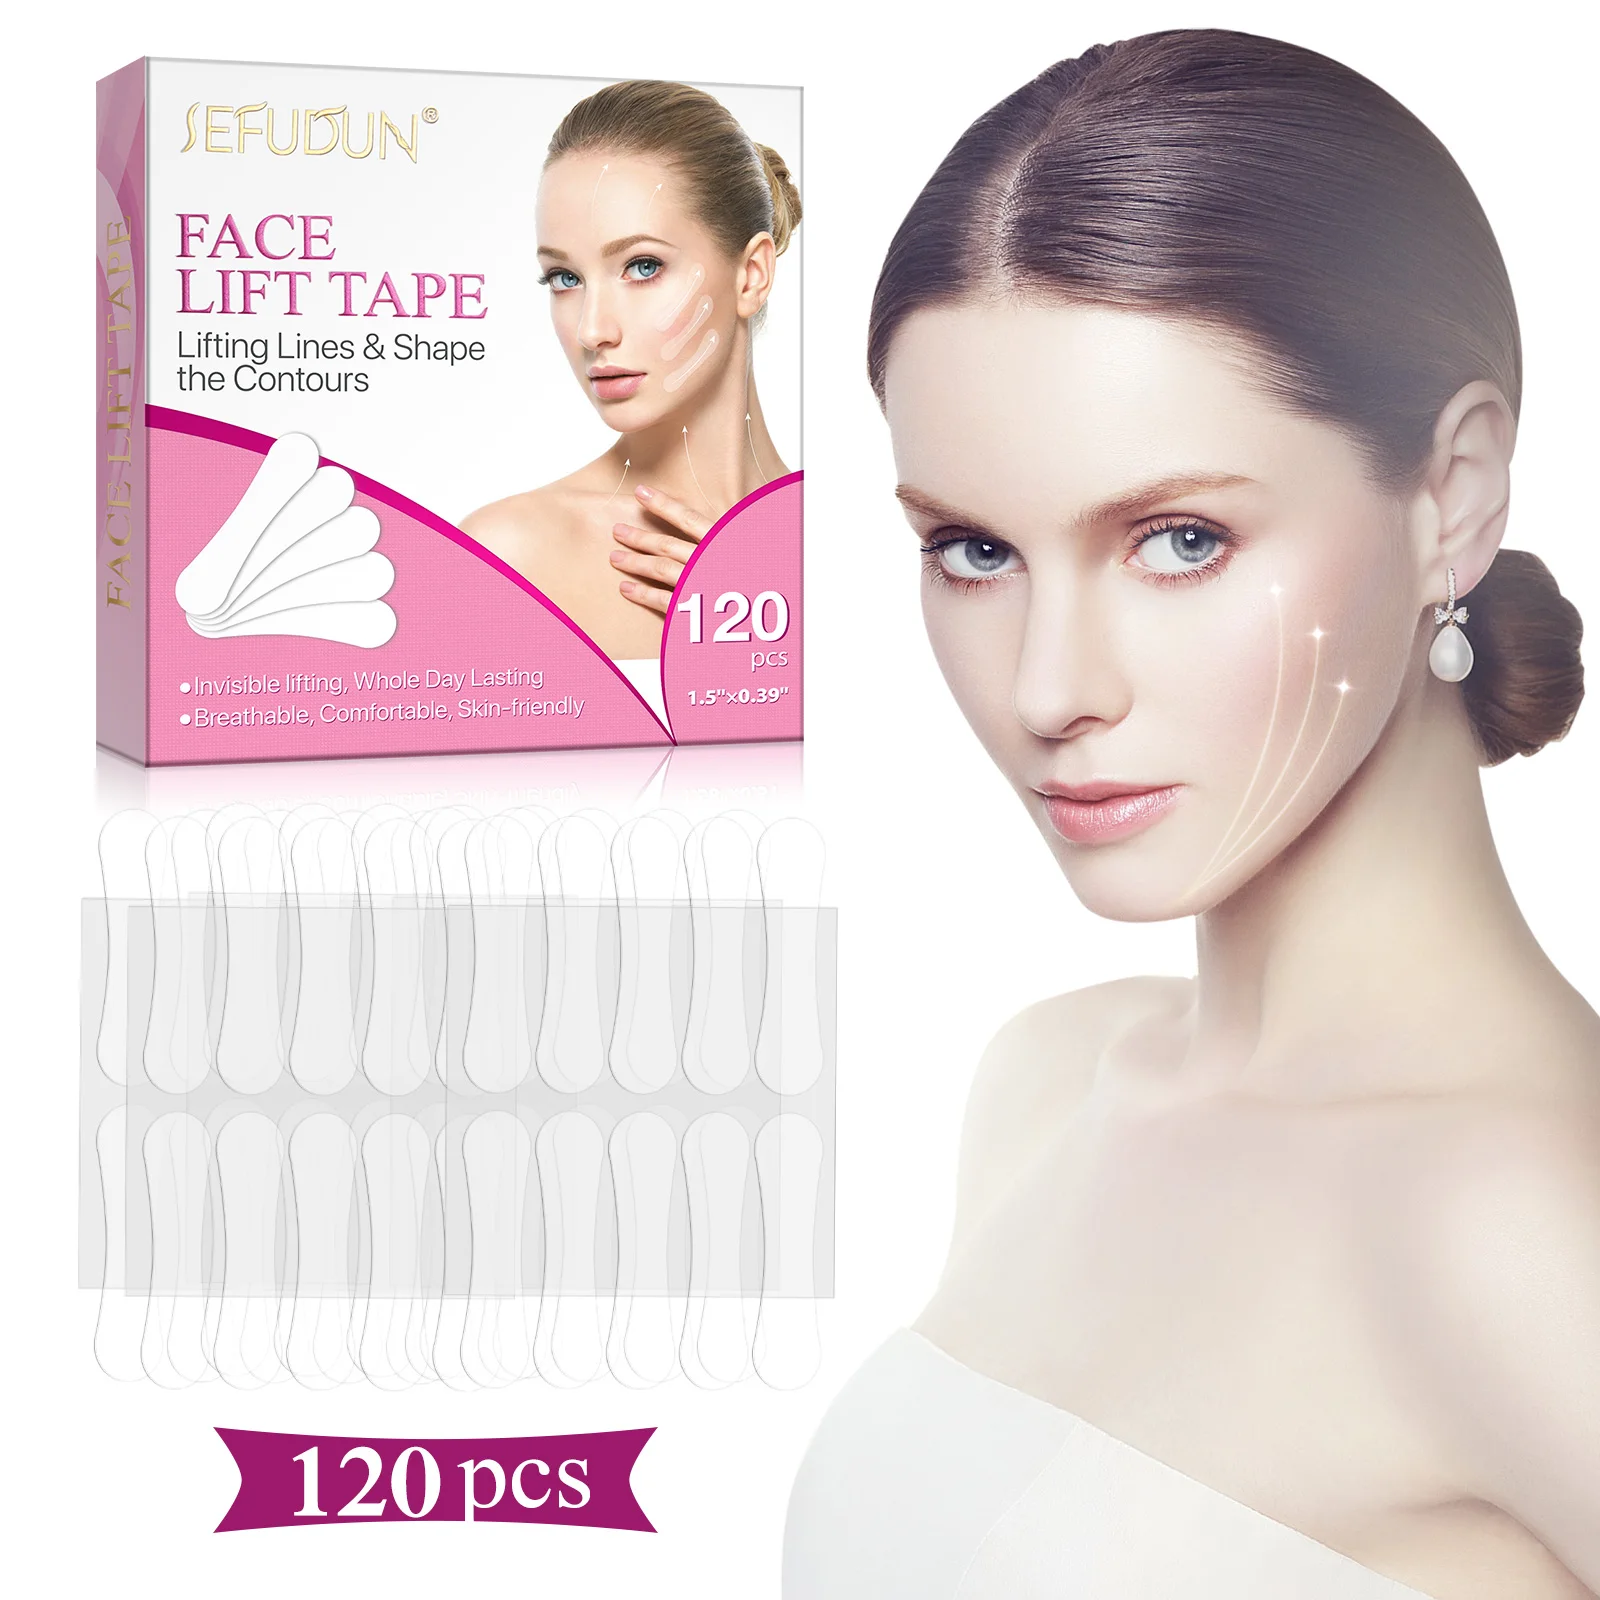 

SEFUDUN Skin Firming Anti Wrinkle Facial 120pcs Face Lift Tape Face Lifting Patch Invisible to Lift Lines and Shape the Contours